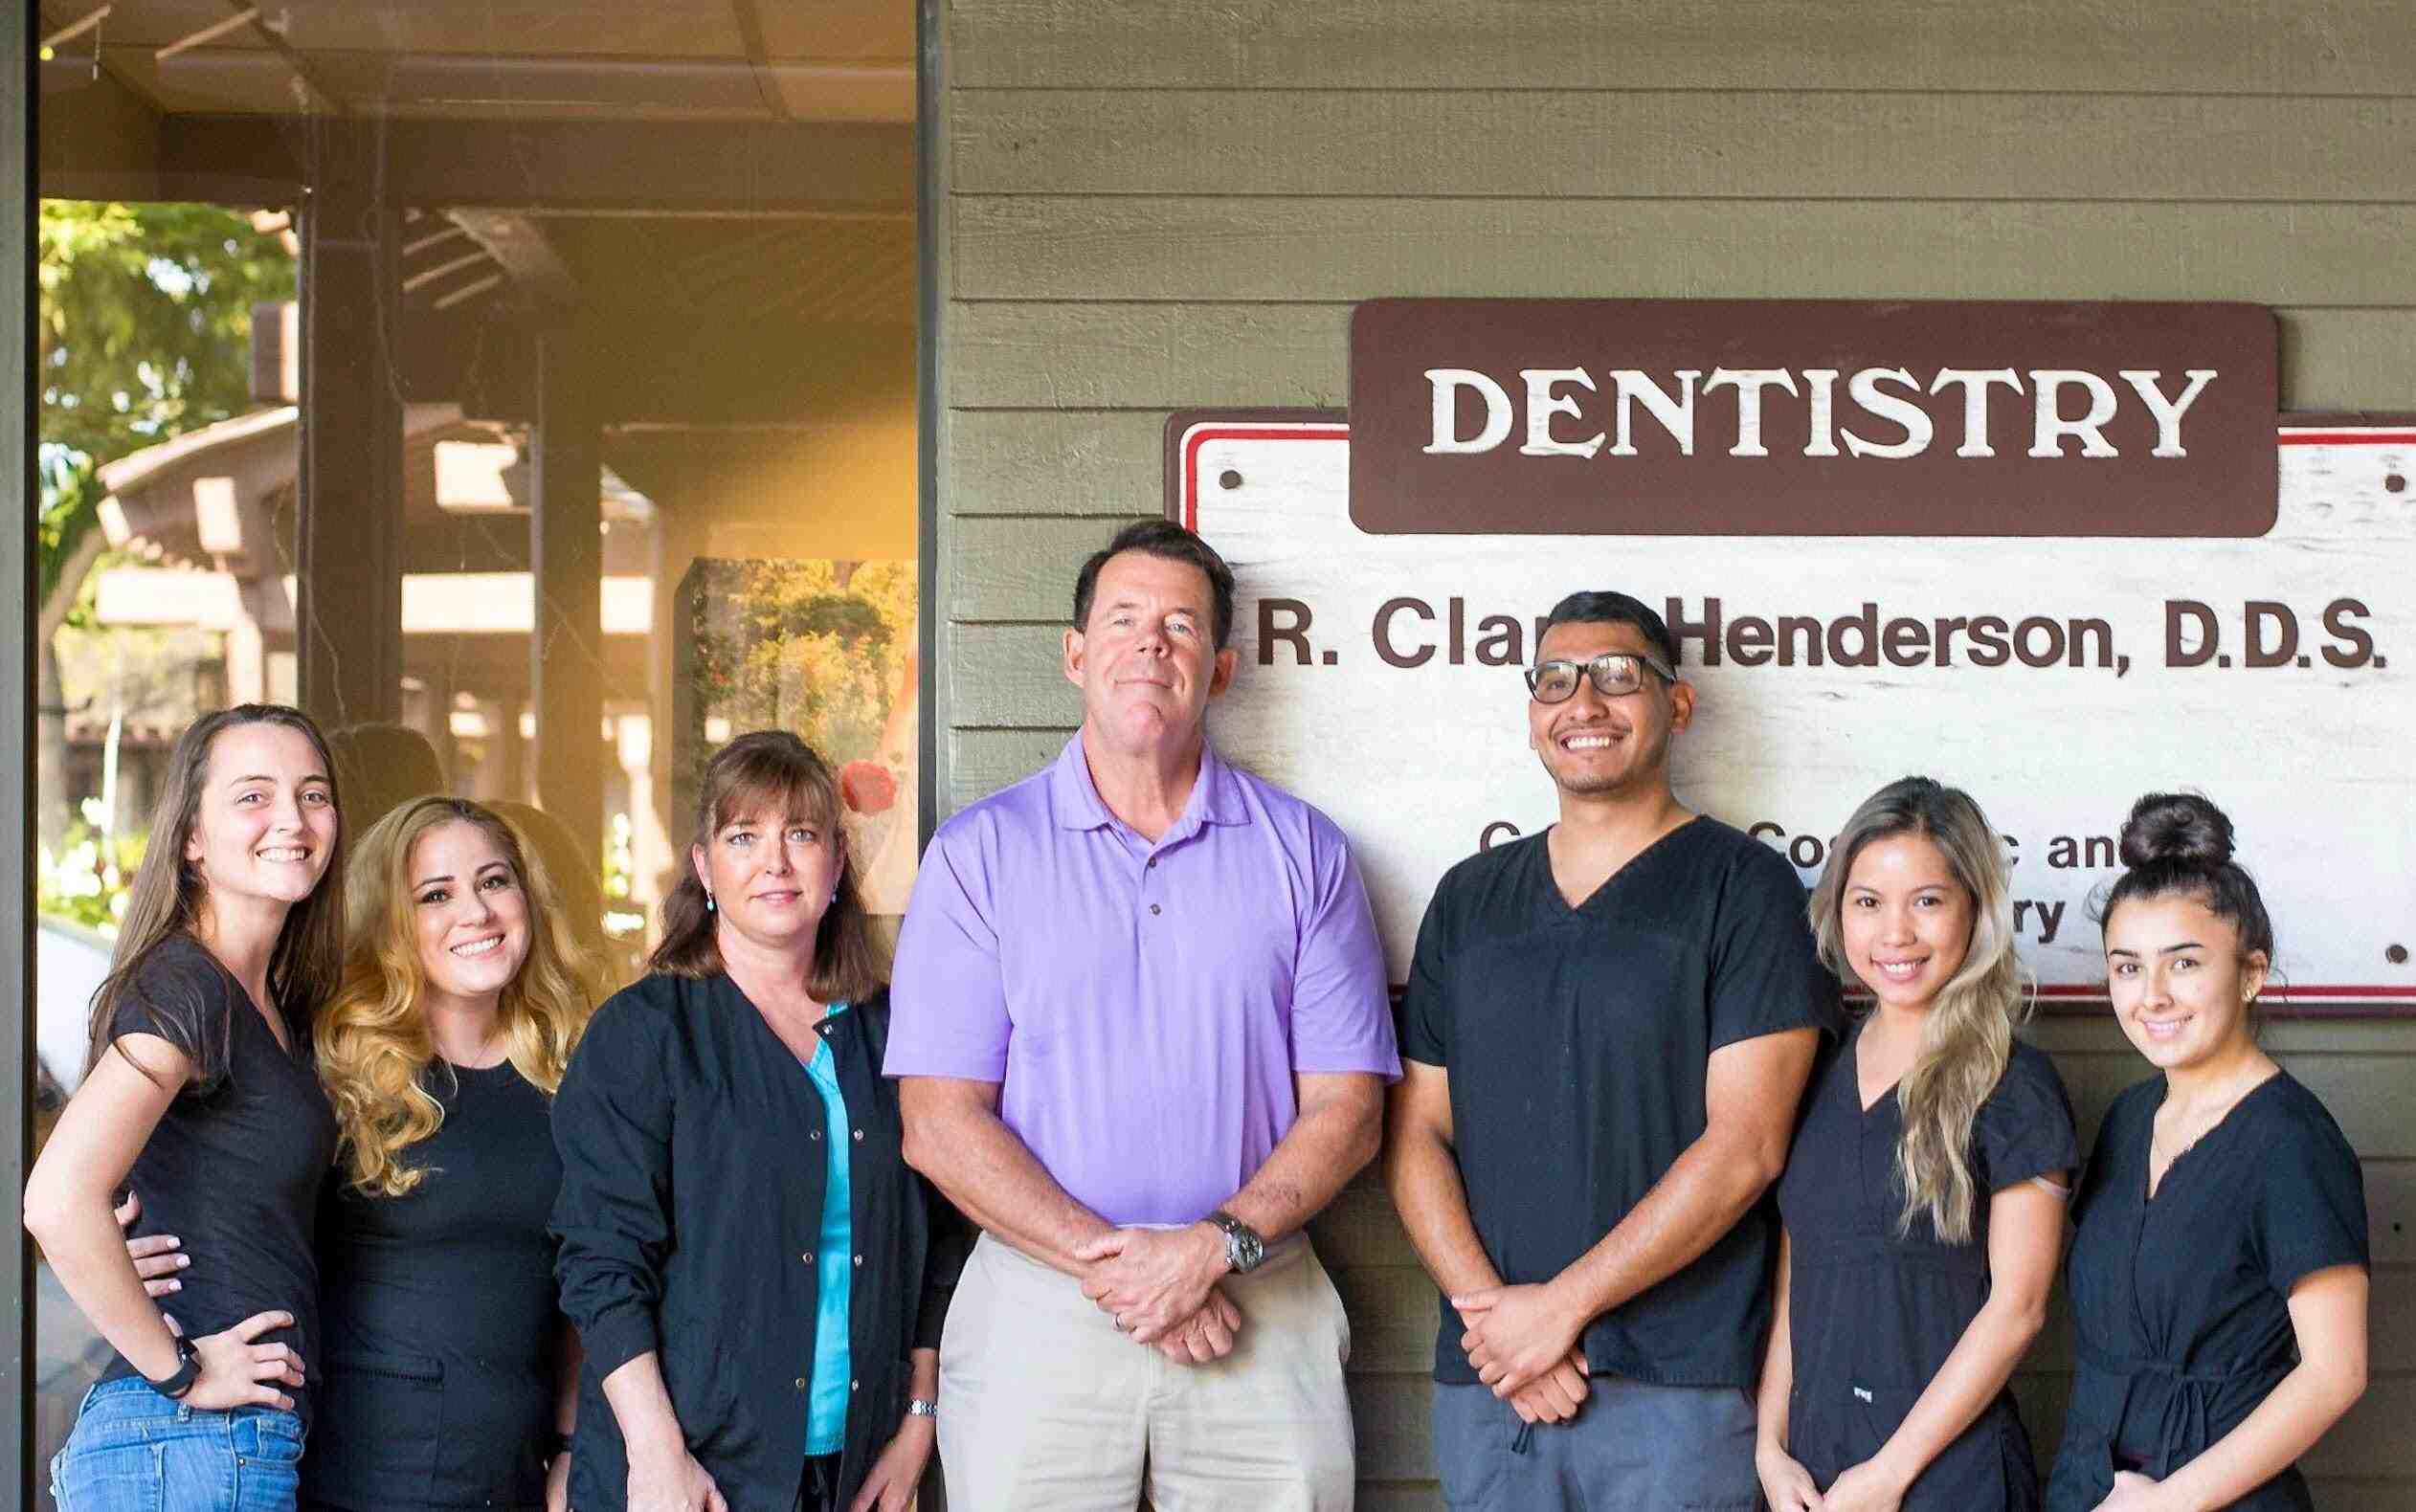 Who is the best dentist in America?